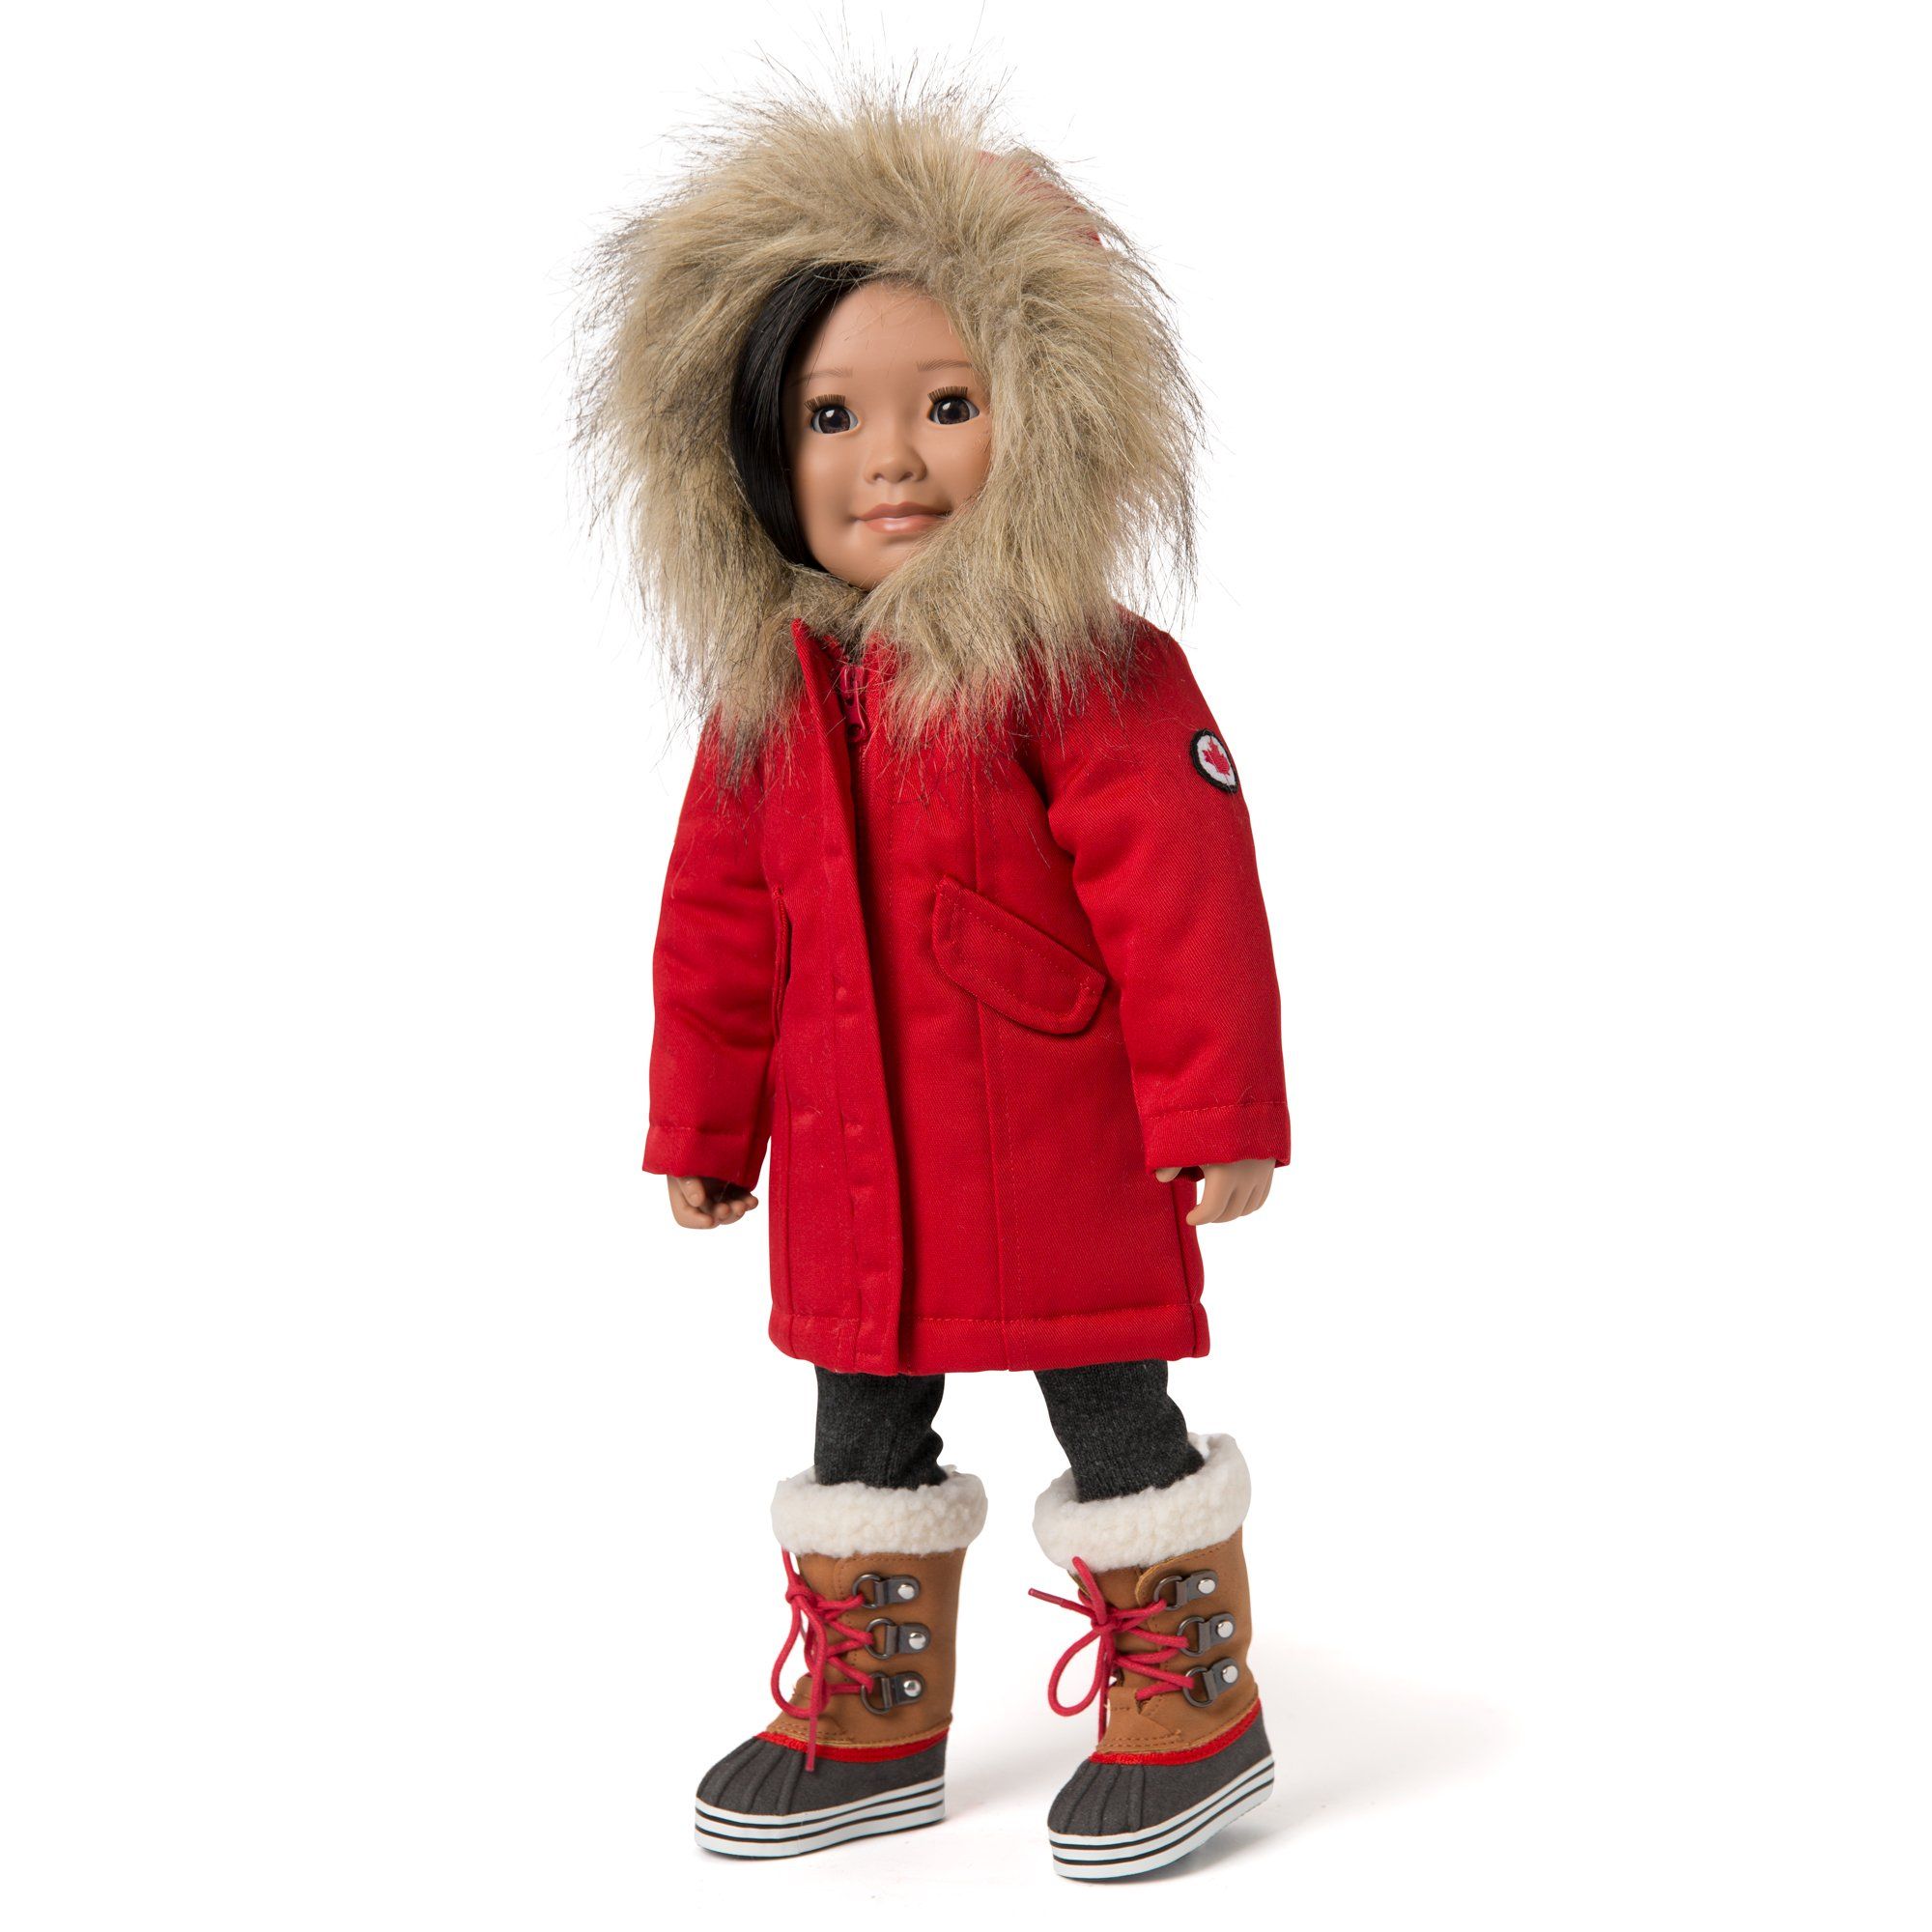 Red Canadian parka is worn by 18 inch doll